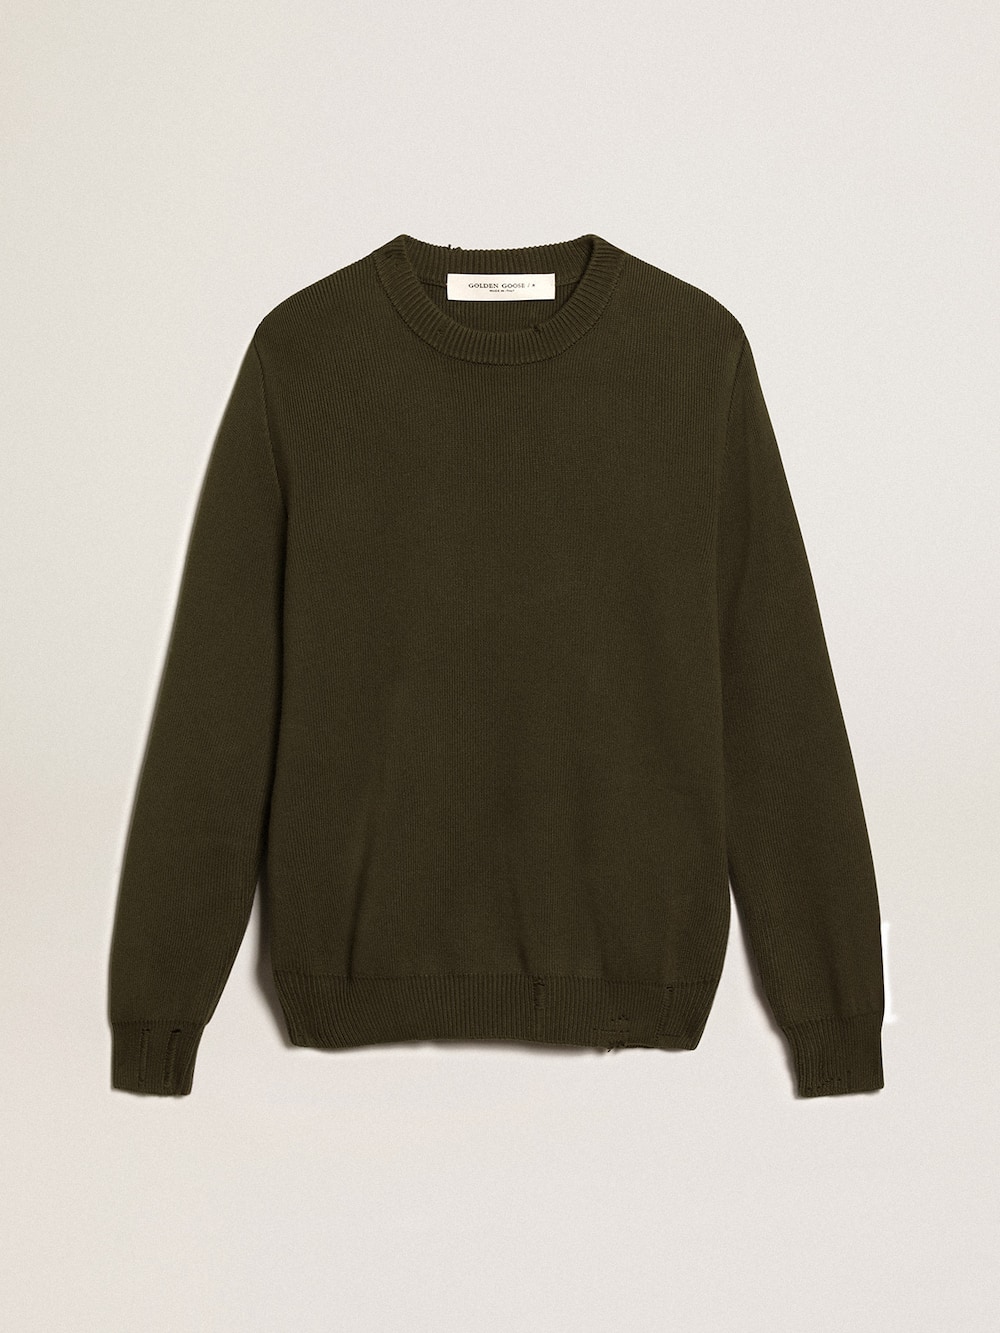 Golden Goose - Men's round-neck sweater in military green cotton in 